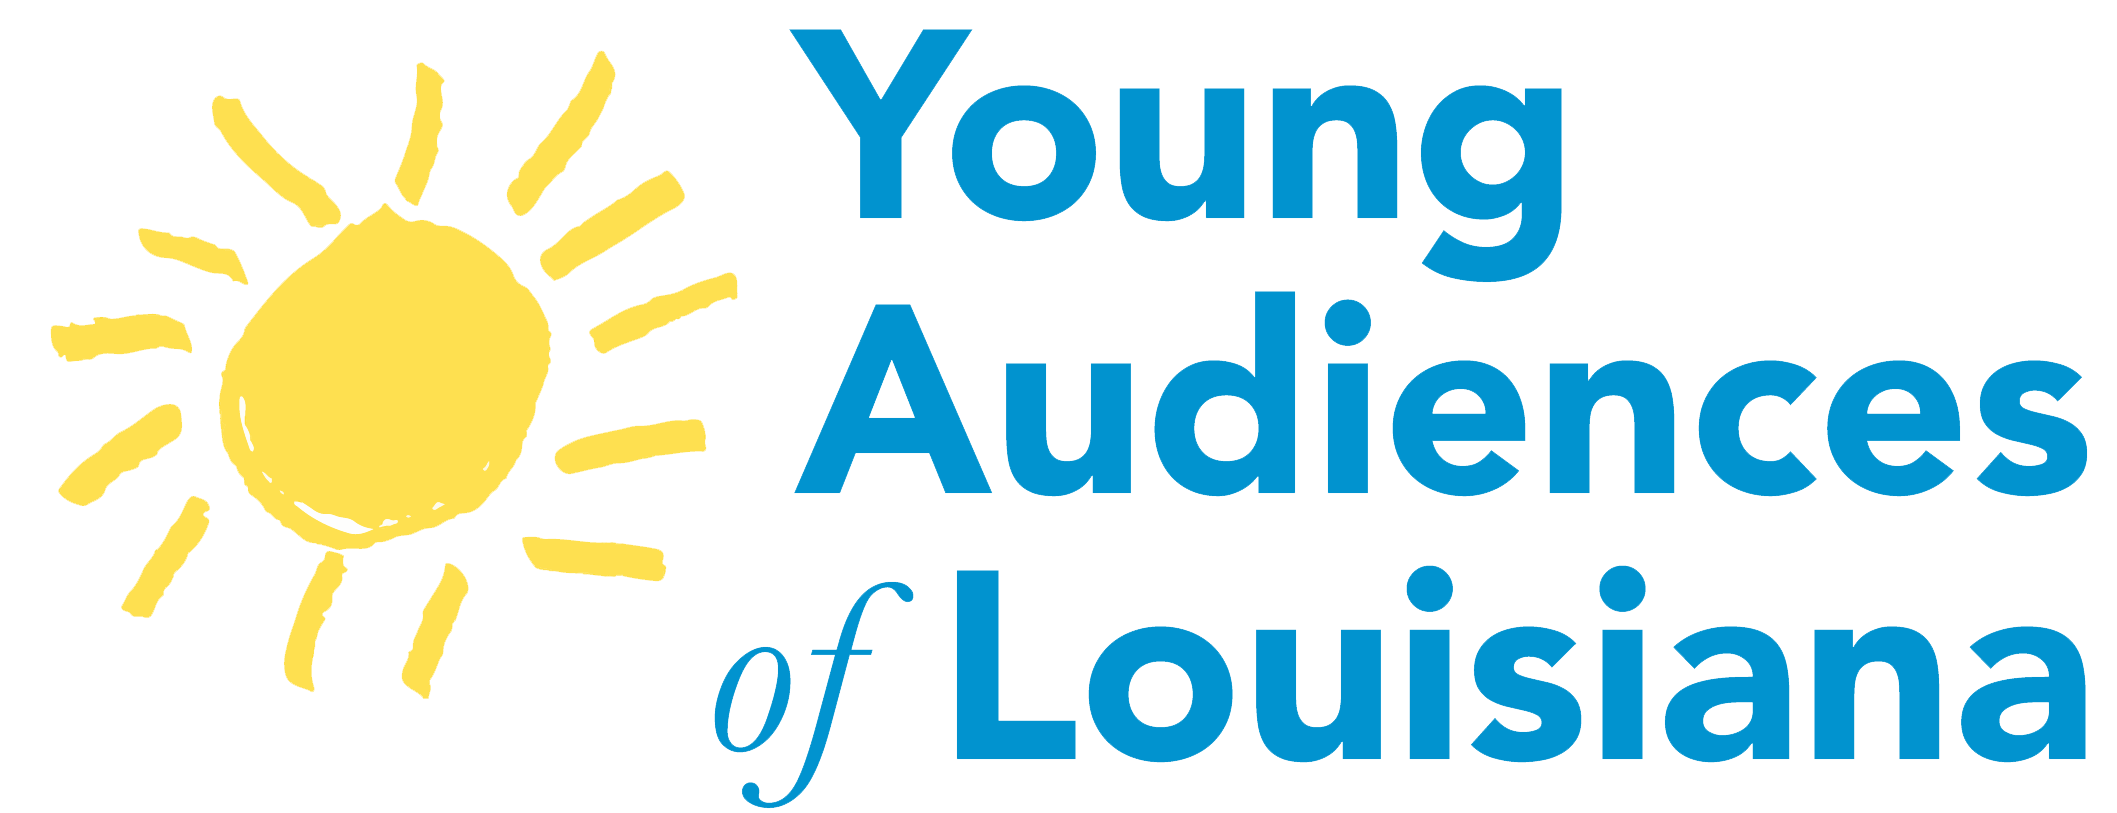 Young Audiences of Louisiana | Leaders in Arts Integration